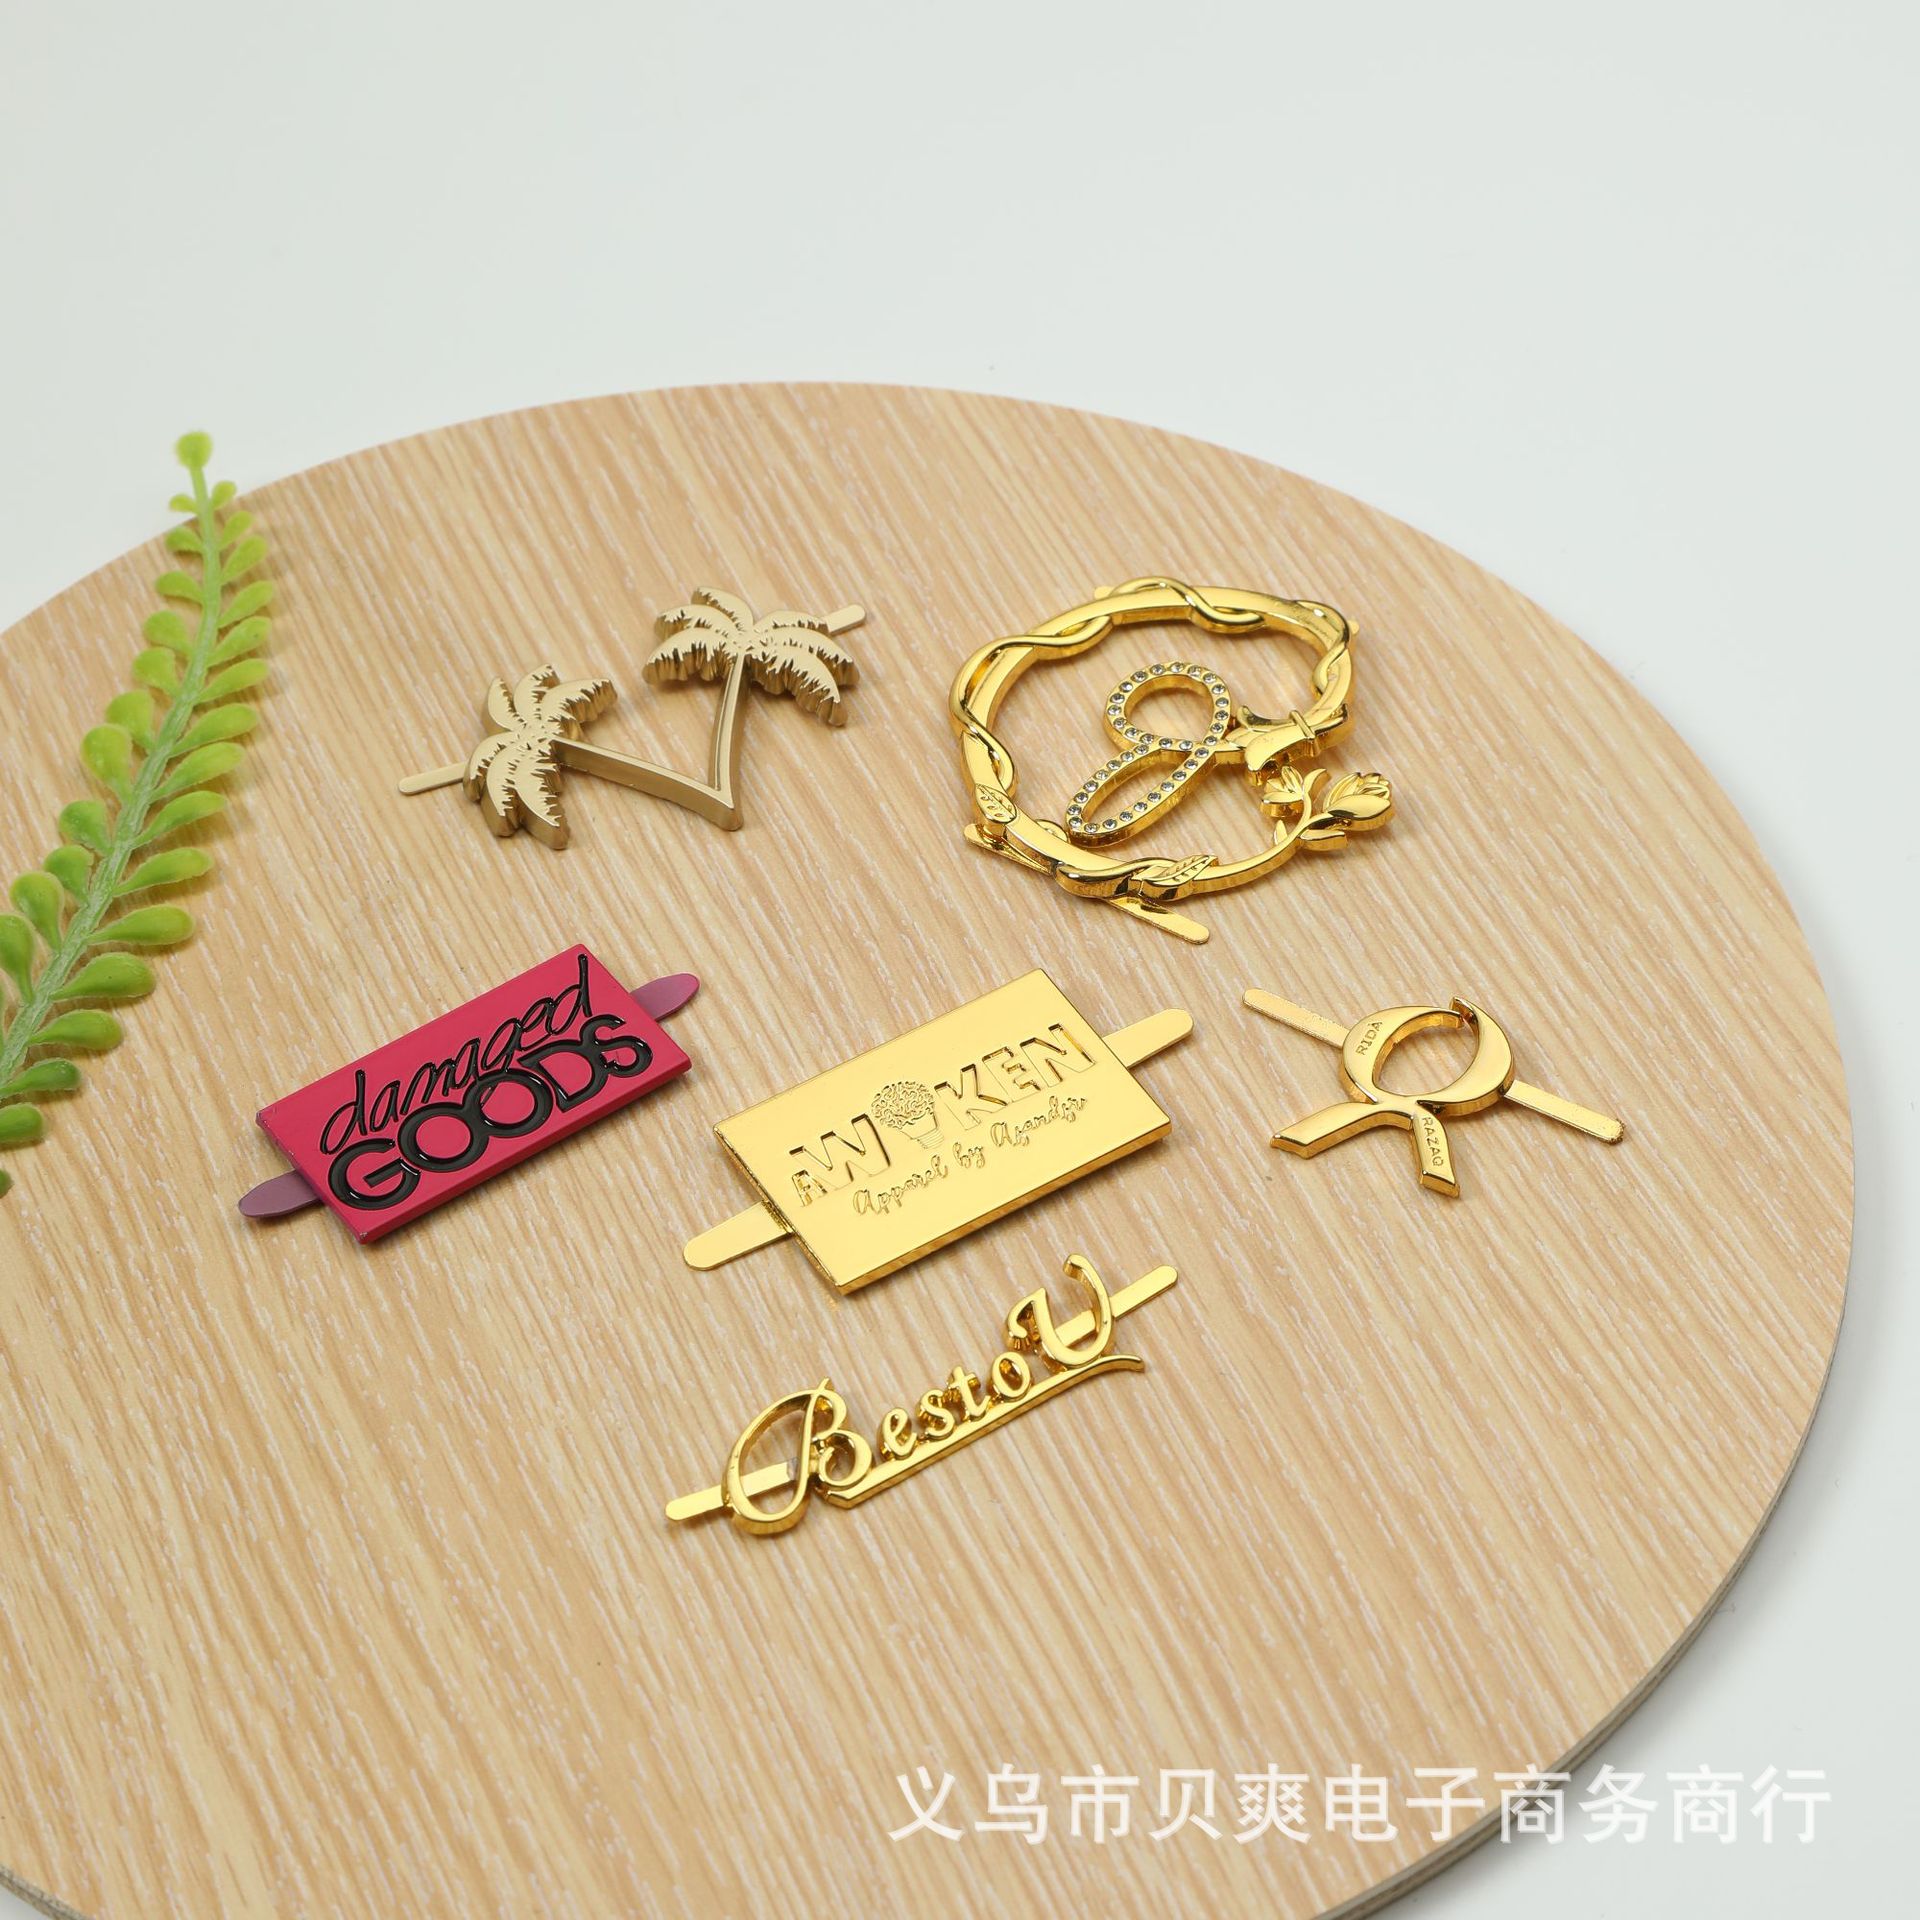 Factory Customized Clothing Leather Bag Label Nameplate Hardware Trademark Sample Processing Support Various Designs